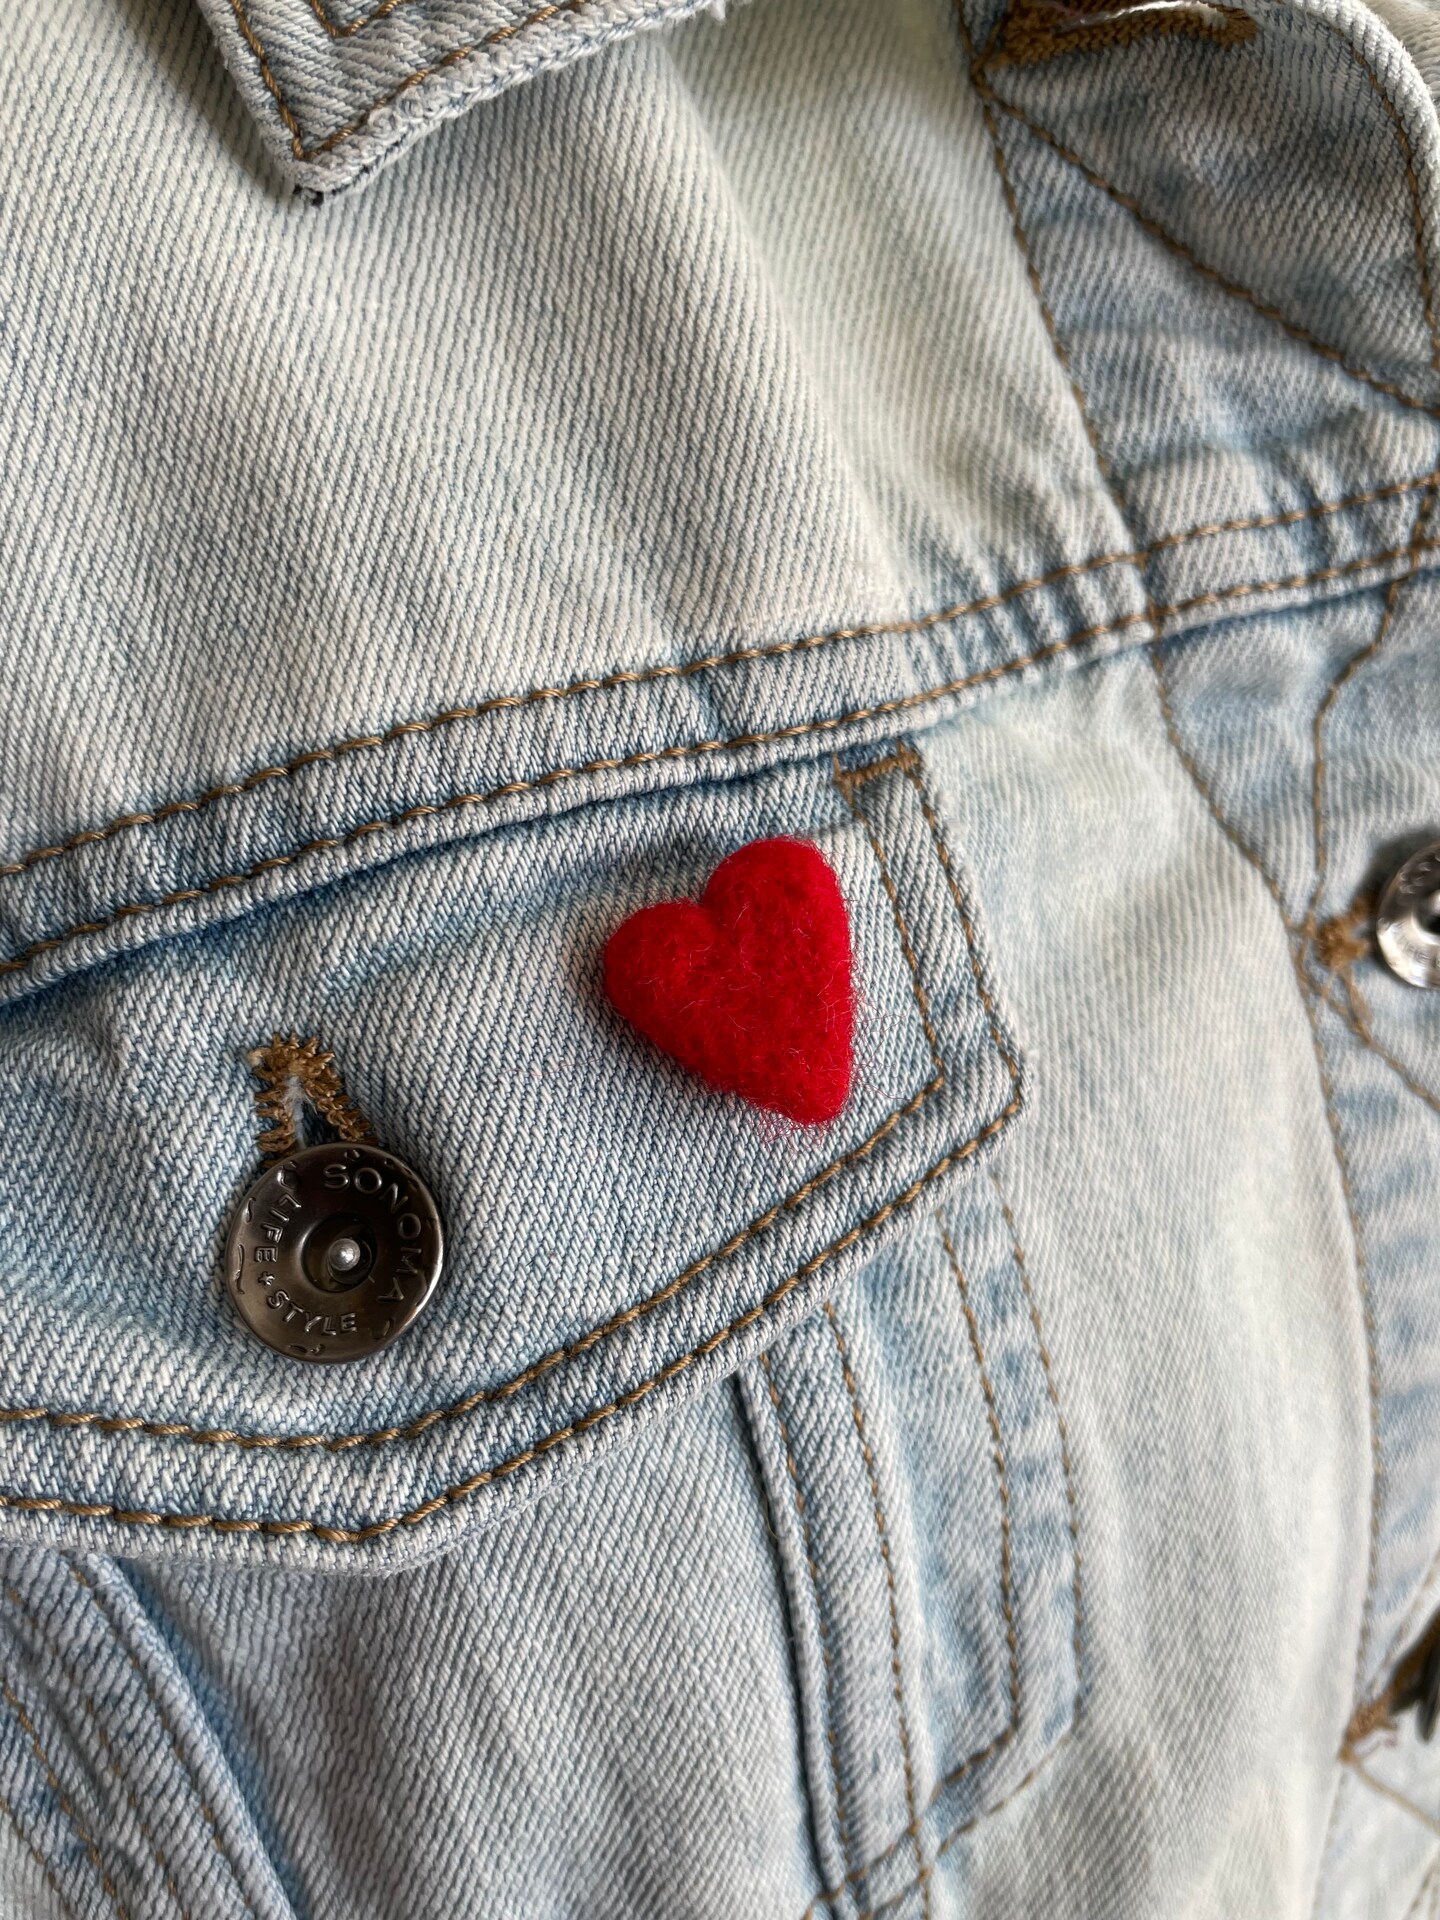 Pin on close to heart